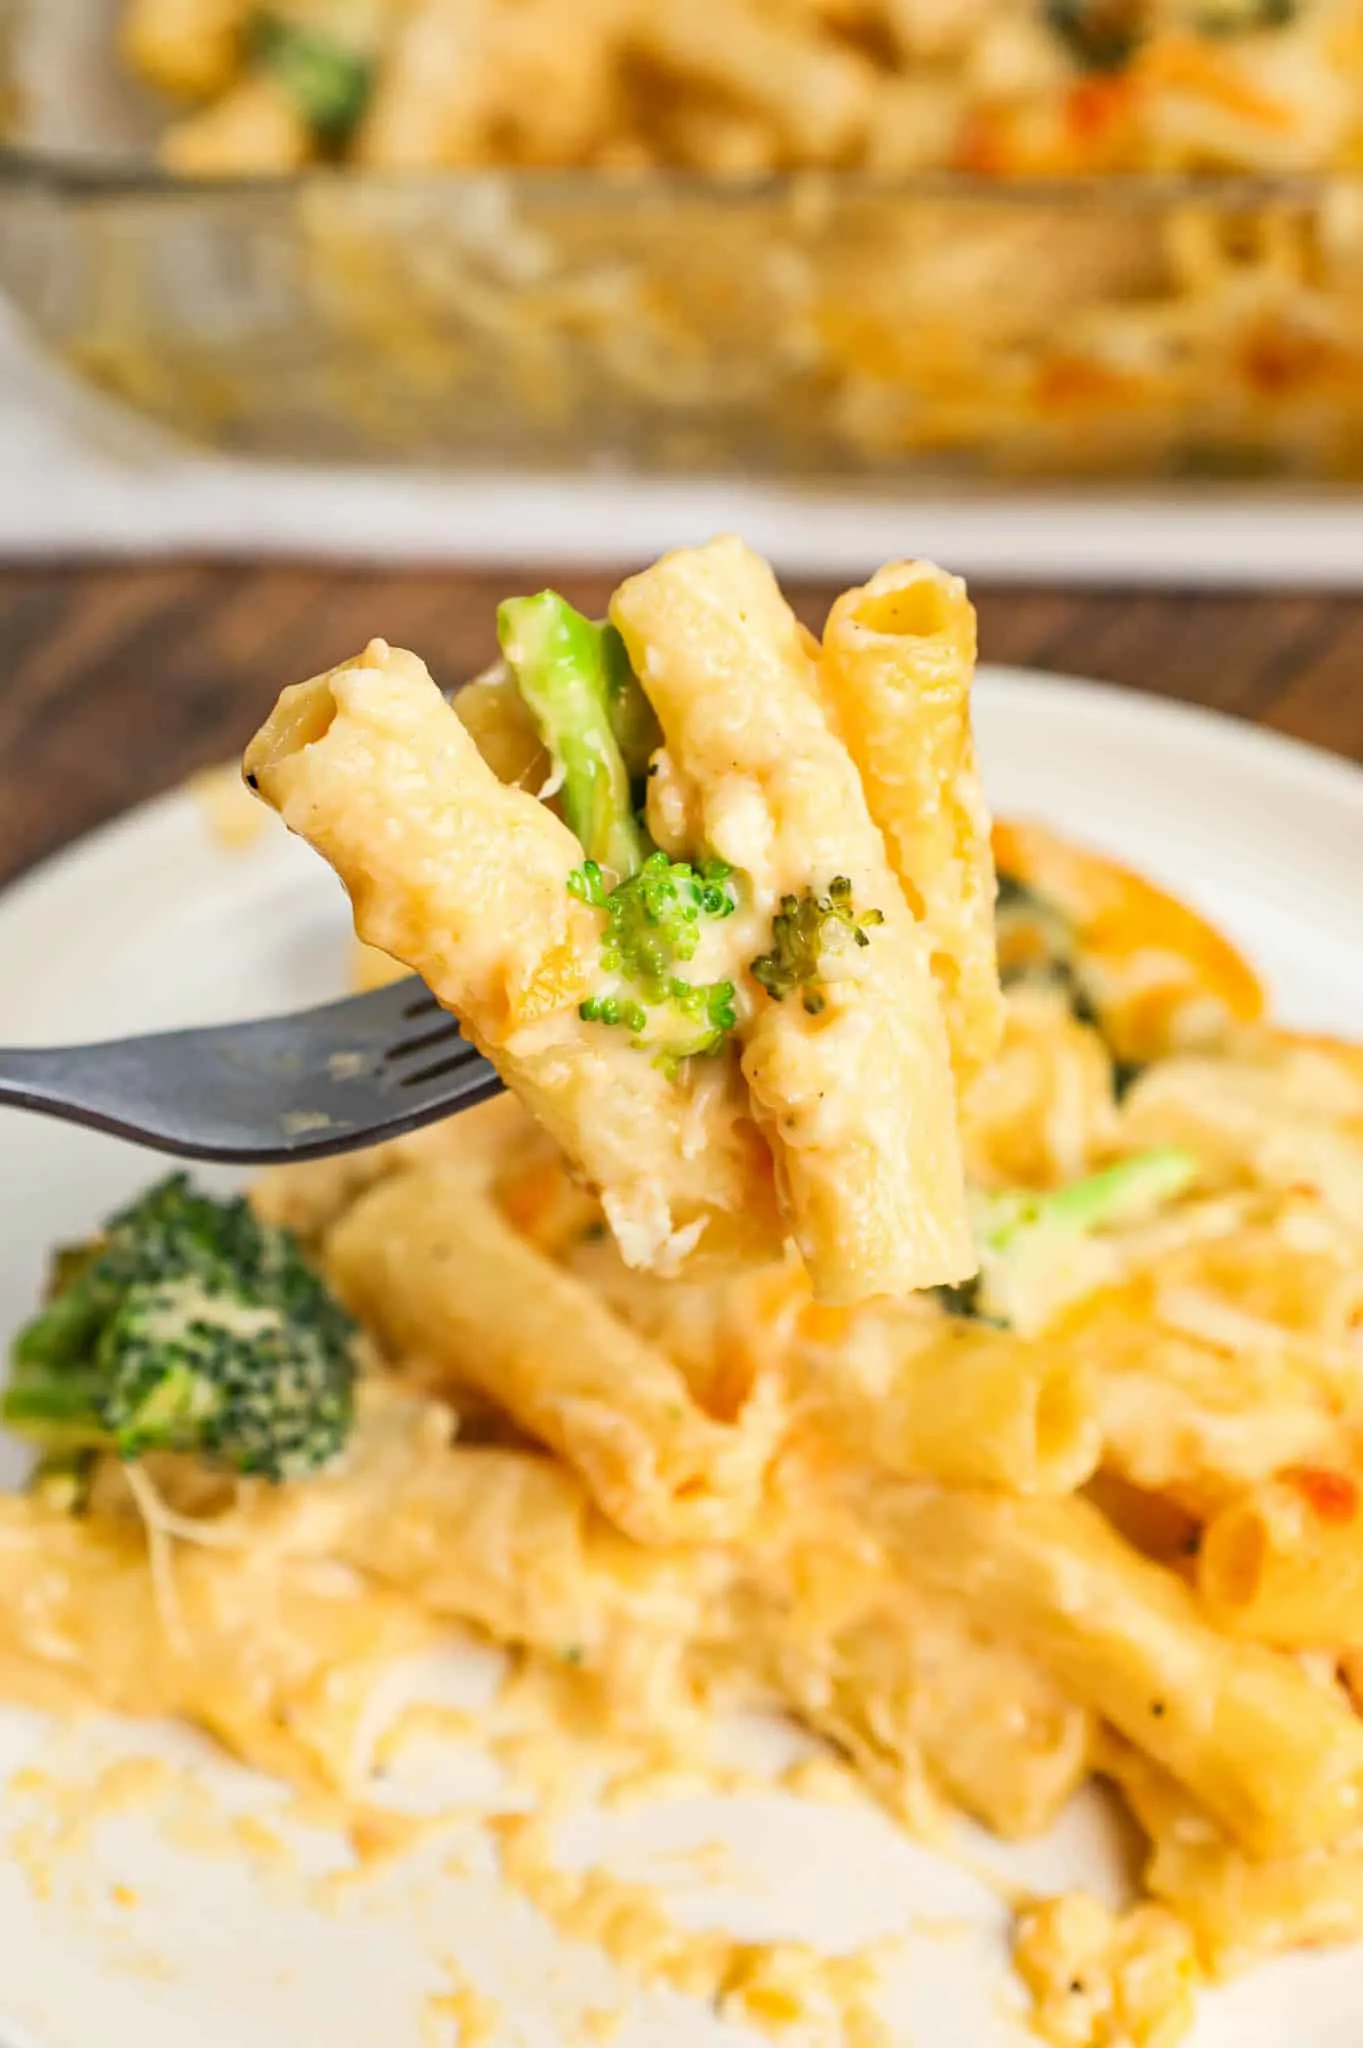 Chicken Broccoli Ziti is an easy baked pasta recipe loaded with shredded chicken, broccoli florets, cream of chicken soup, cheddar soup, cheddar and mozzarella cheese.